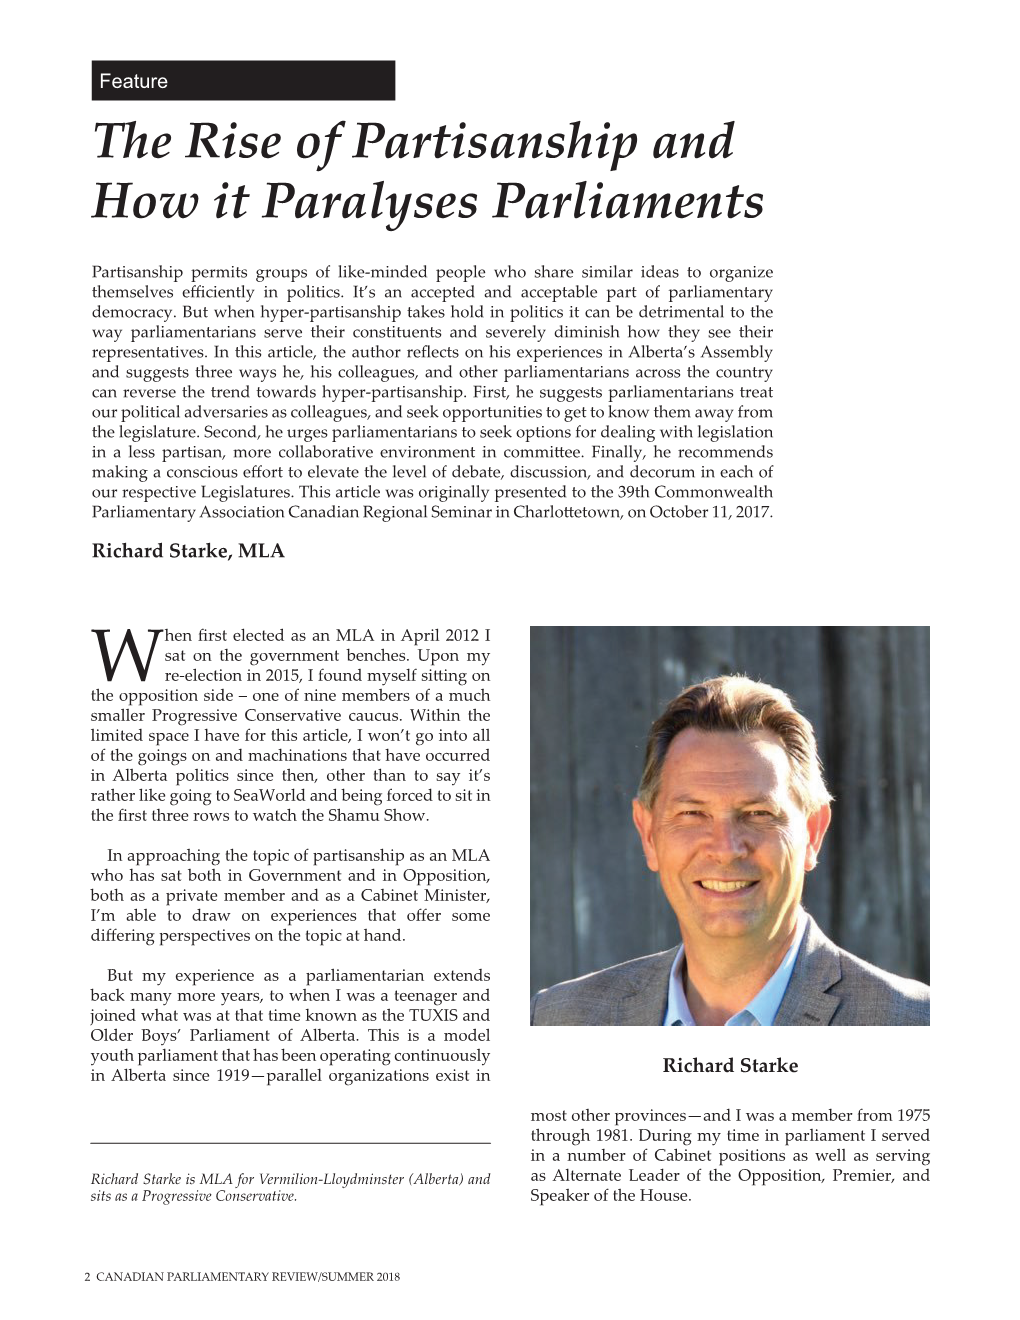 The Rise of Partisanship and How It Paralyses Parliaments